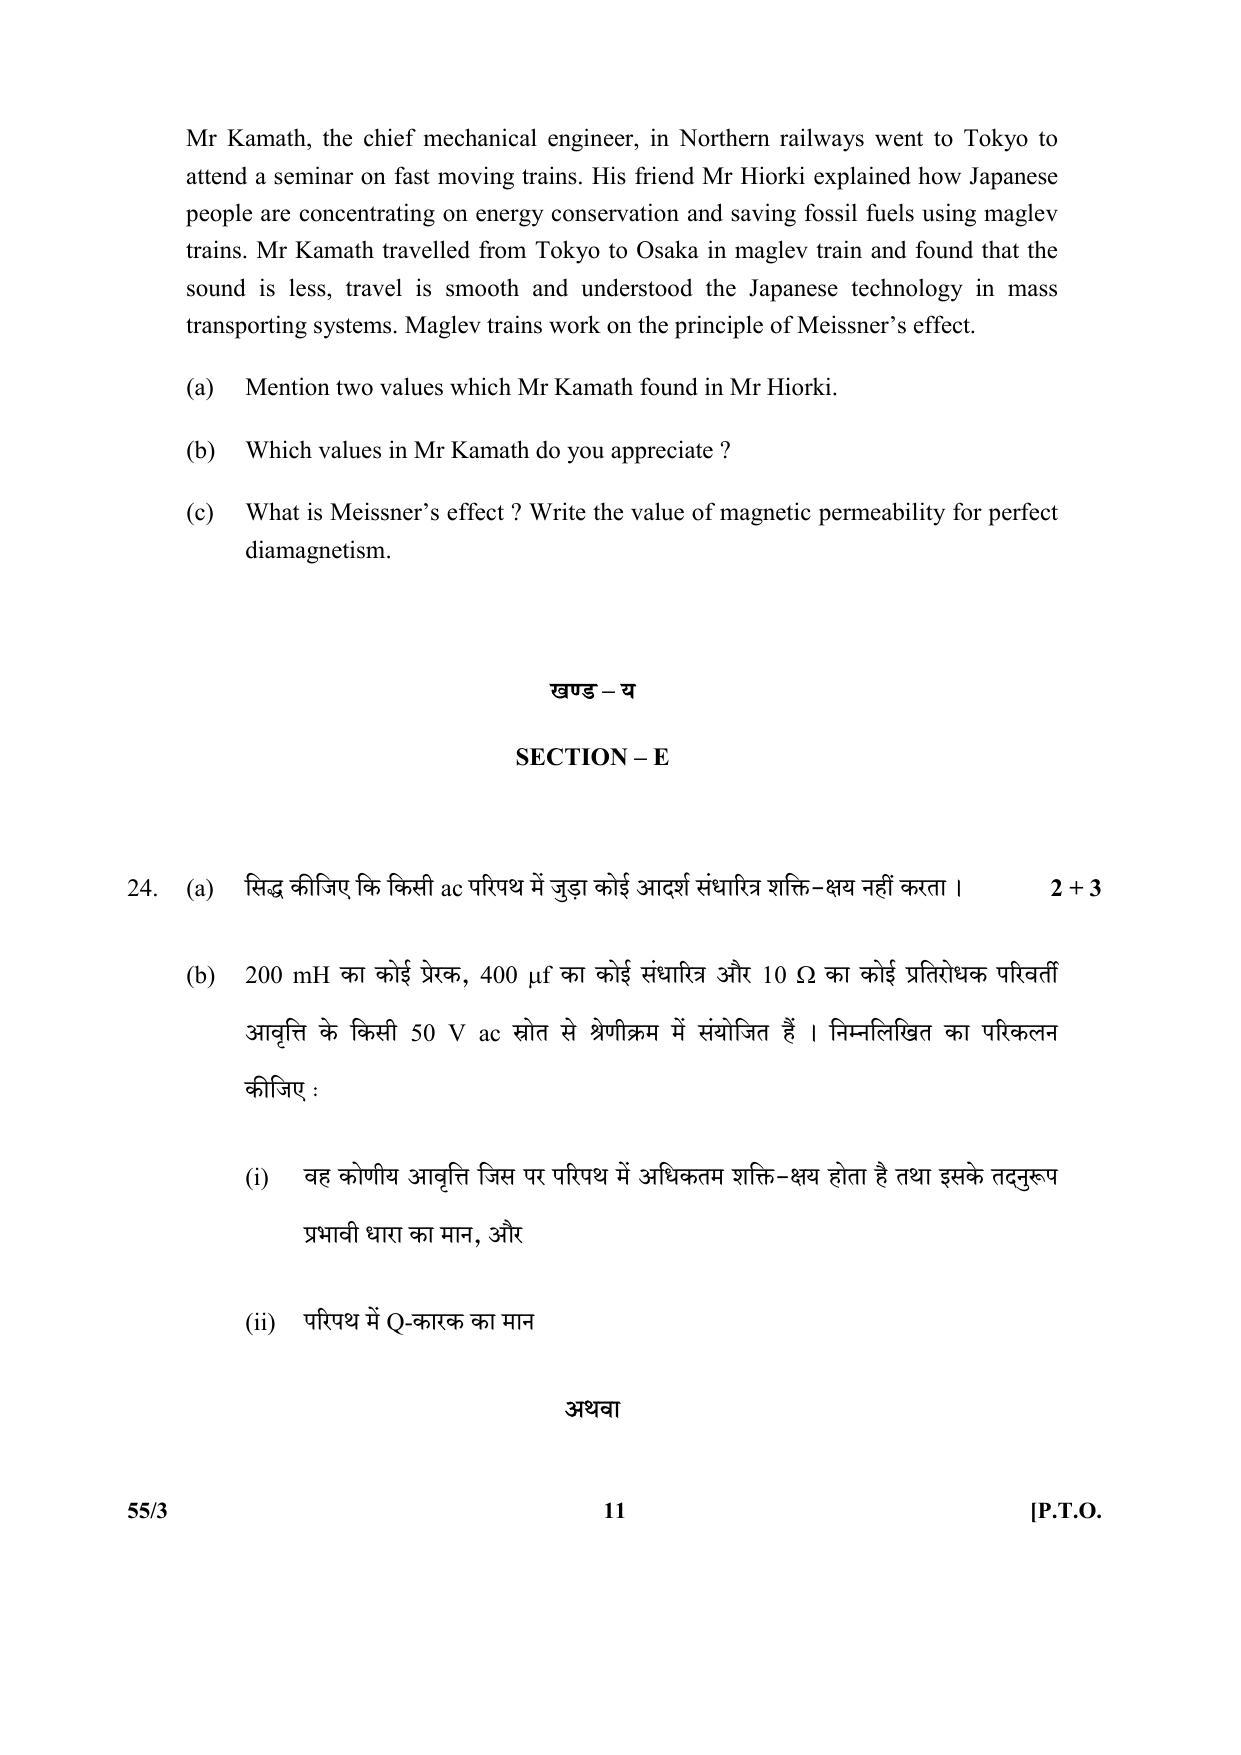 CBSE Class 12 55-3 (Physics) 2017-comptt Question Paper - Page 11